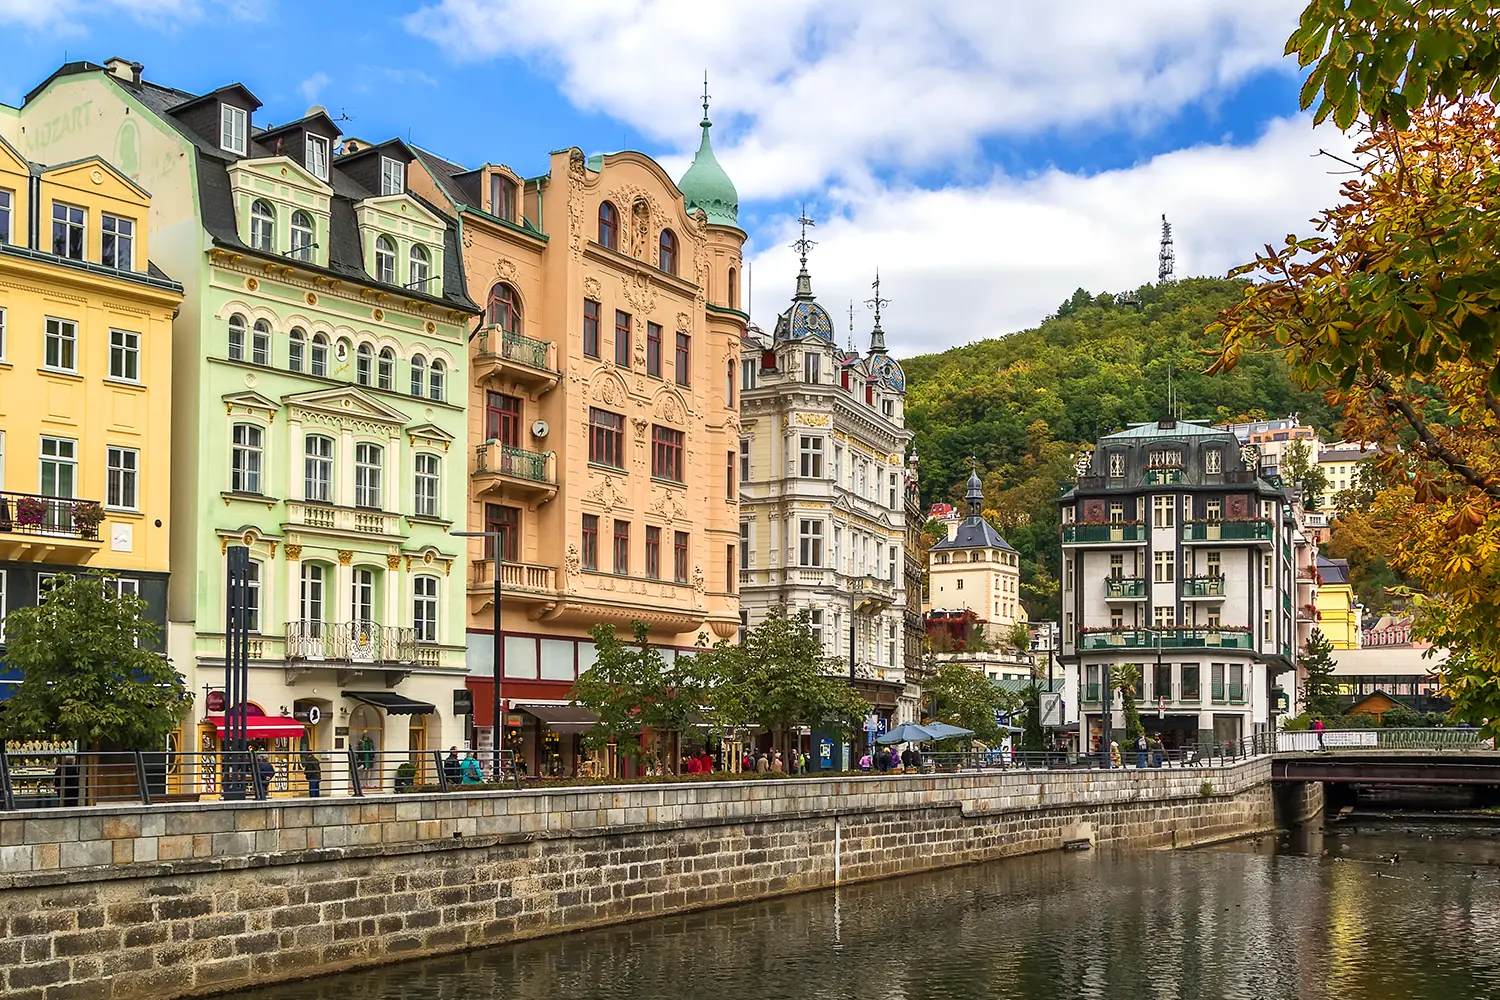 Tepla river in the center of Karlovy Vary, Czechia